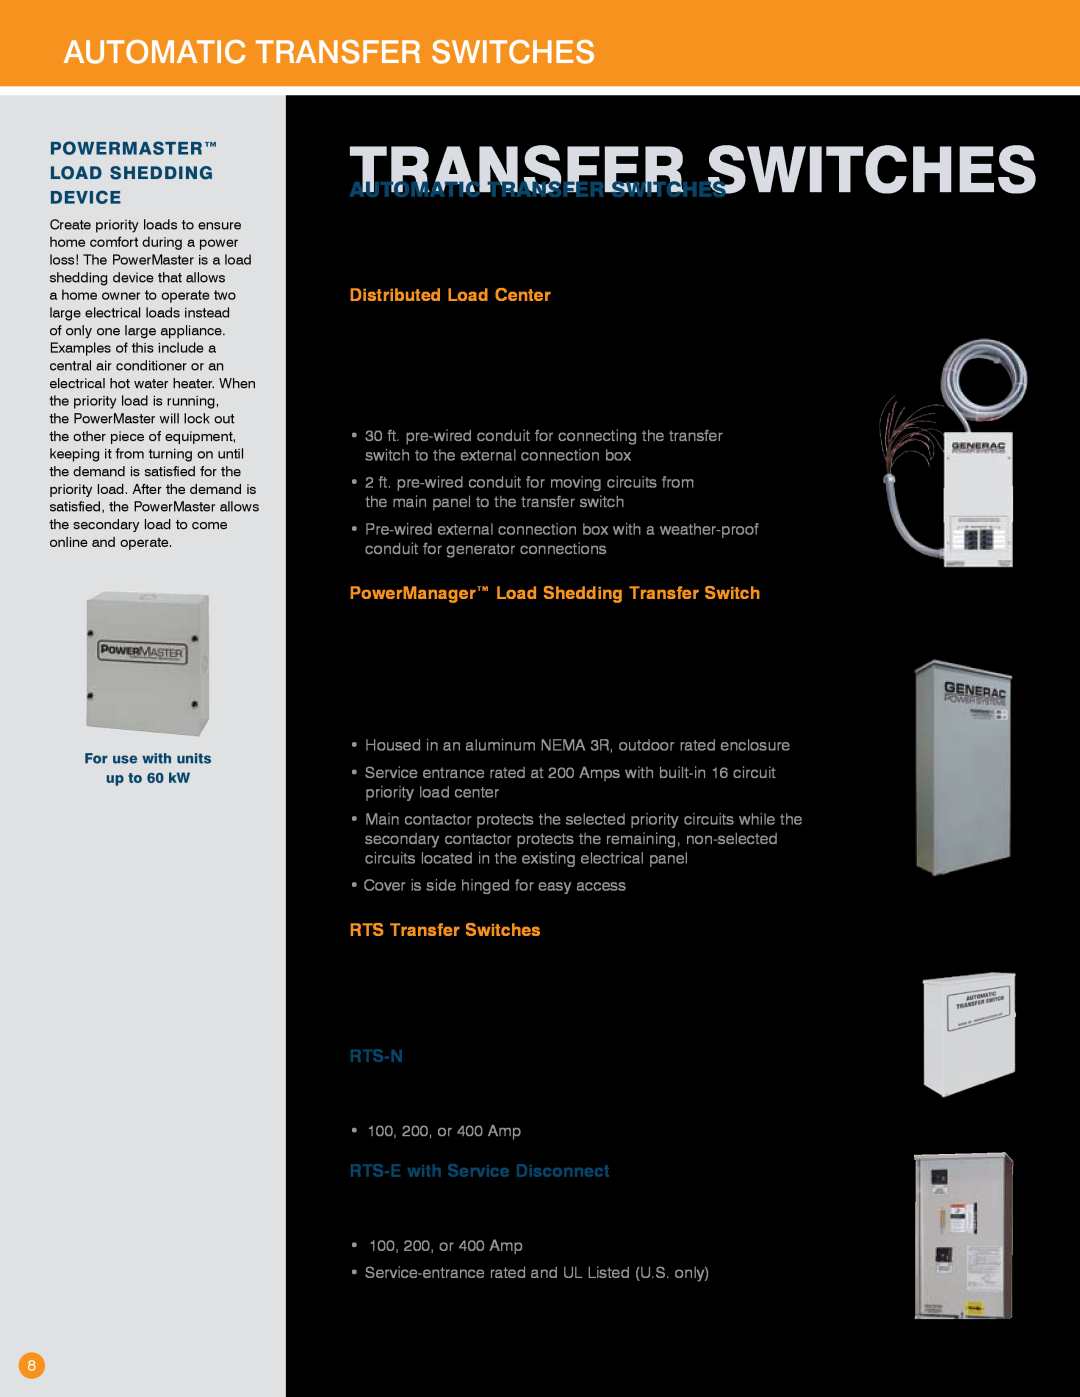 Generac Power Systems Transfer Switches and Accessories Automatic Transfer Switches, PowerMaster Load Shedding Device 